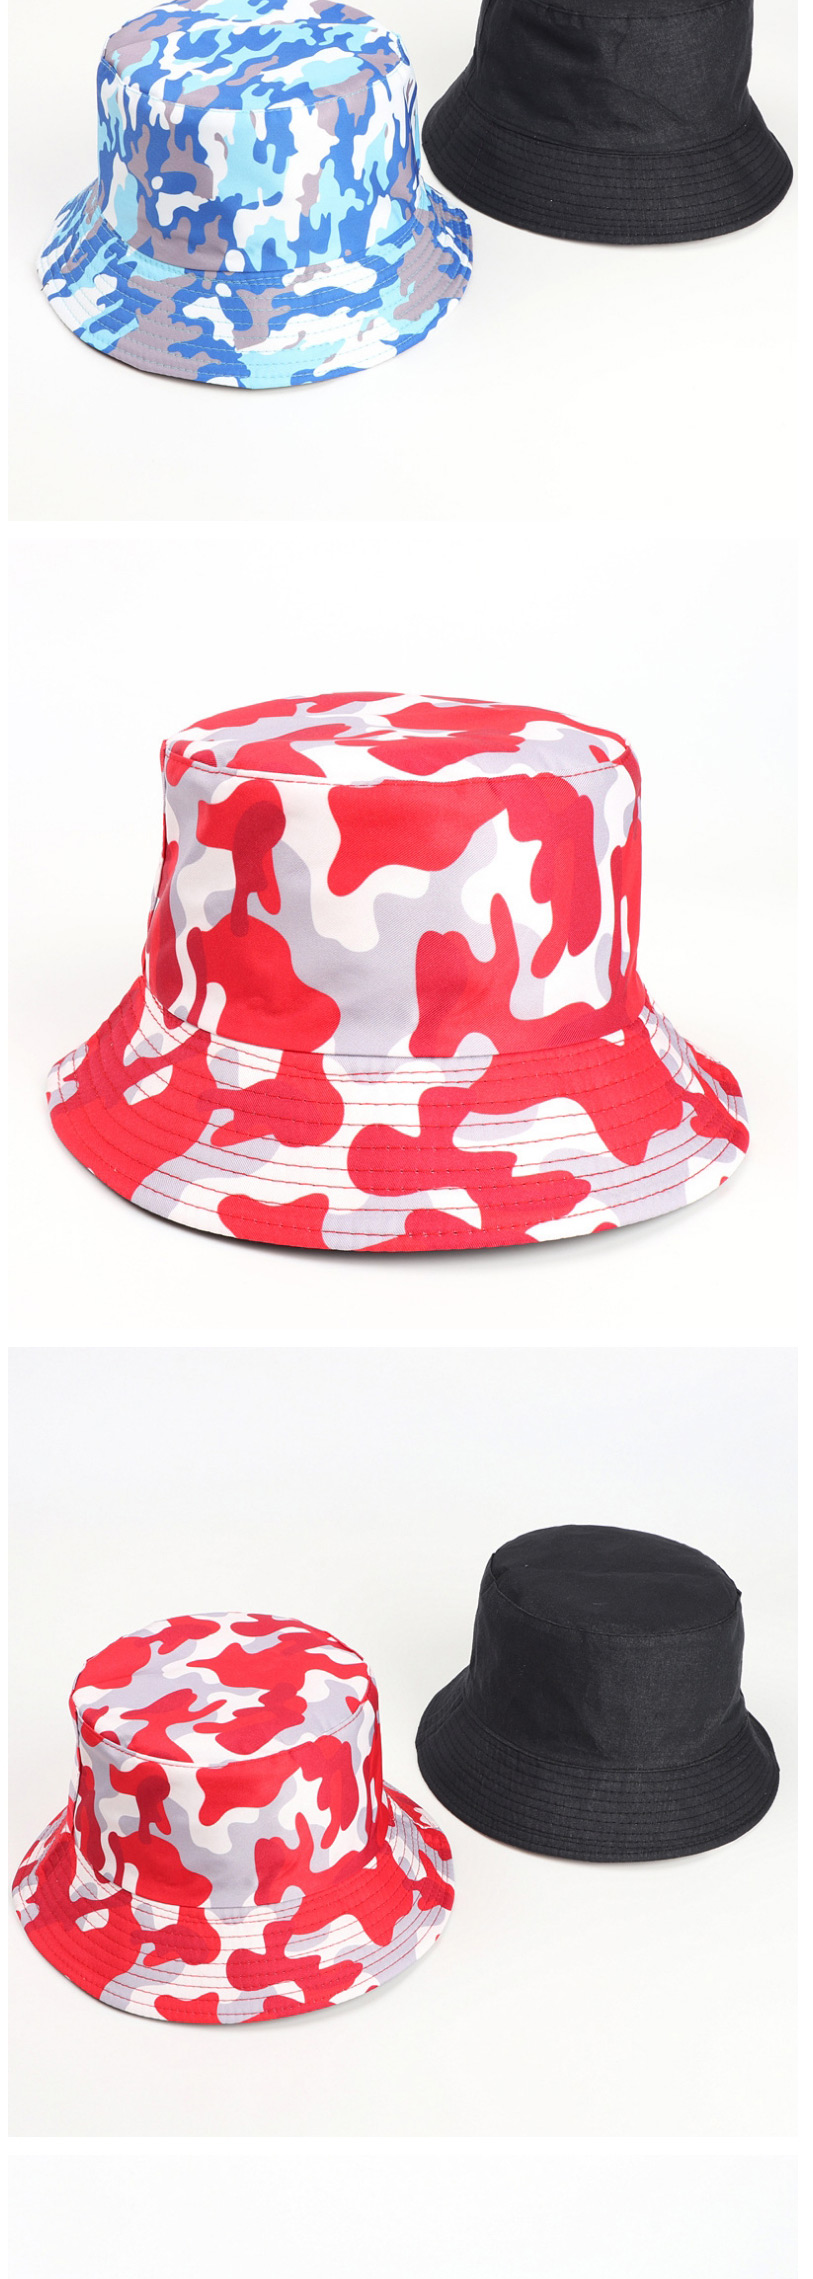 Fashion Orange Printed Double-sided Multicolor Camouflage Fisherman Hat,Sun Hats